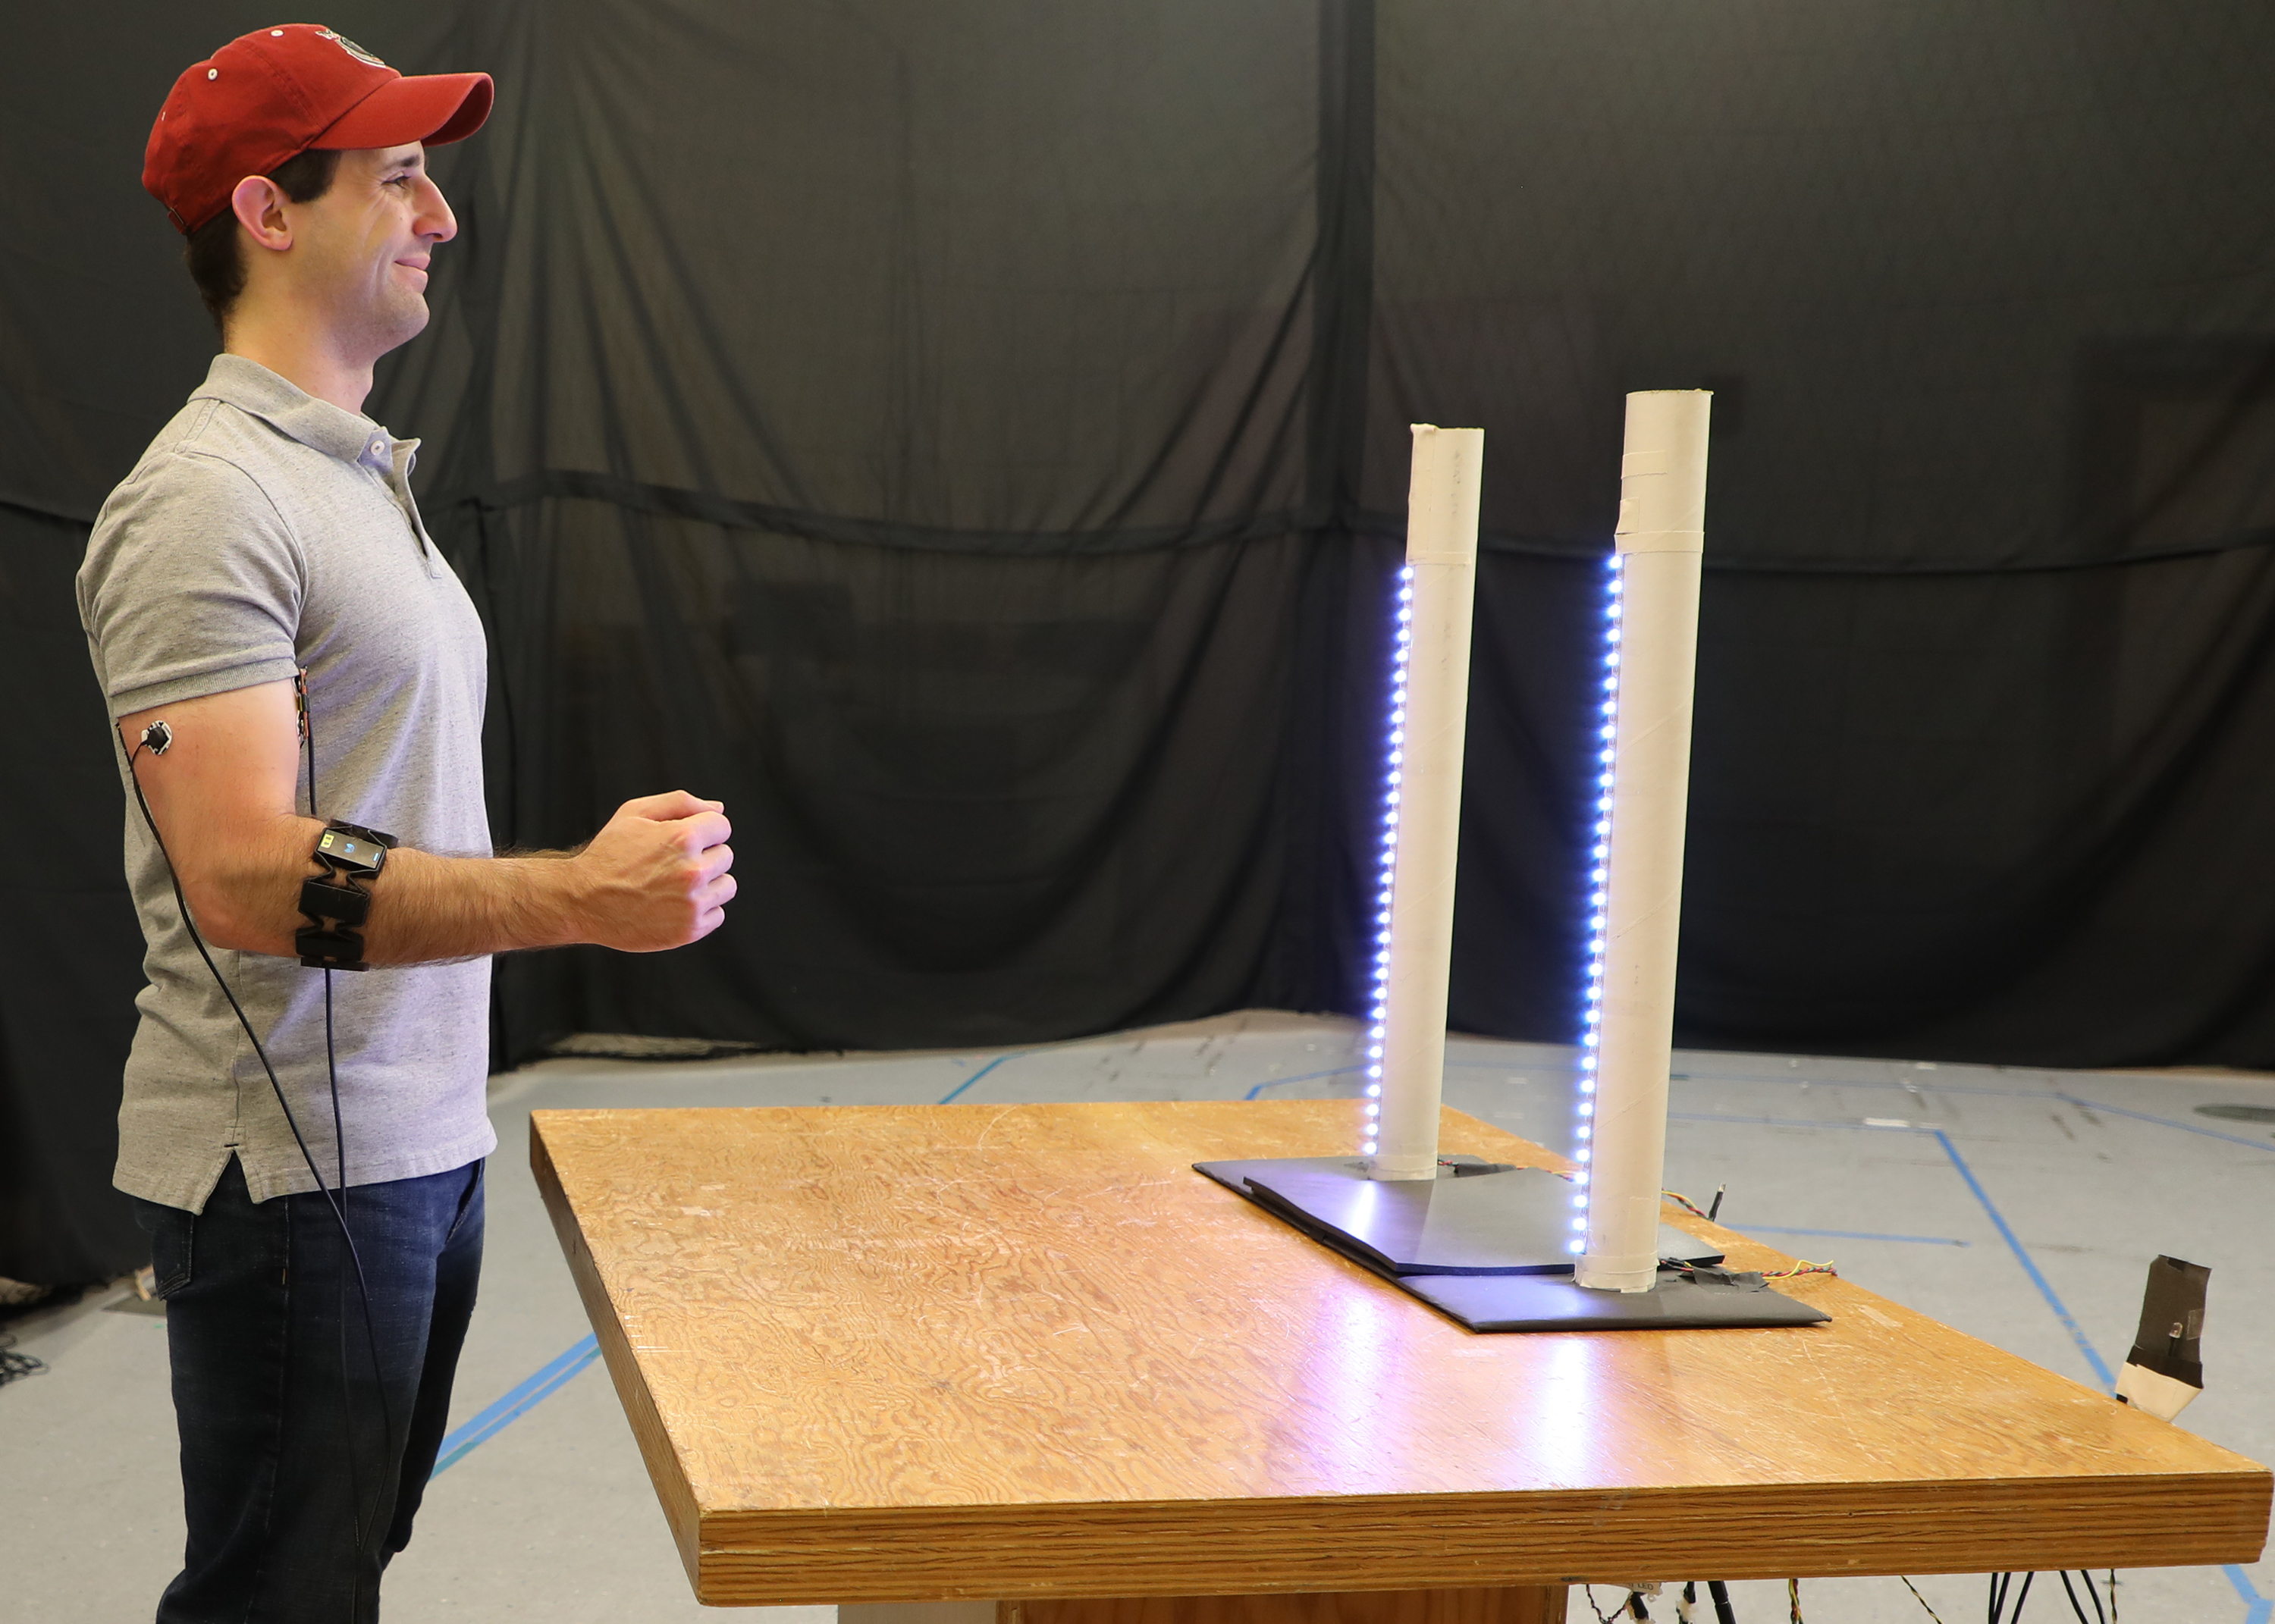 Experiments included sessions that evaluated the classifiers by cuing gestures with LEDs